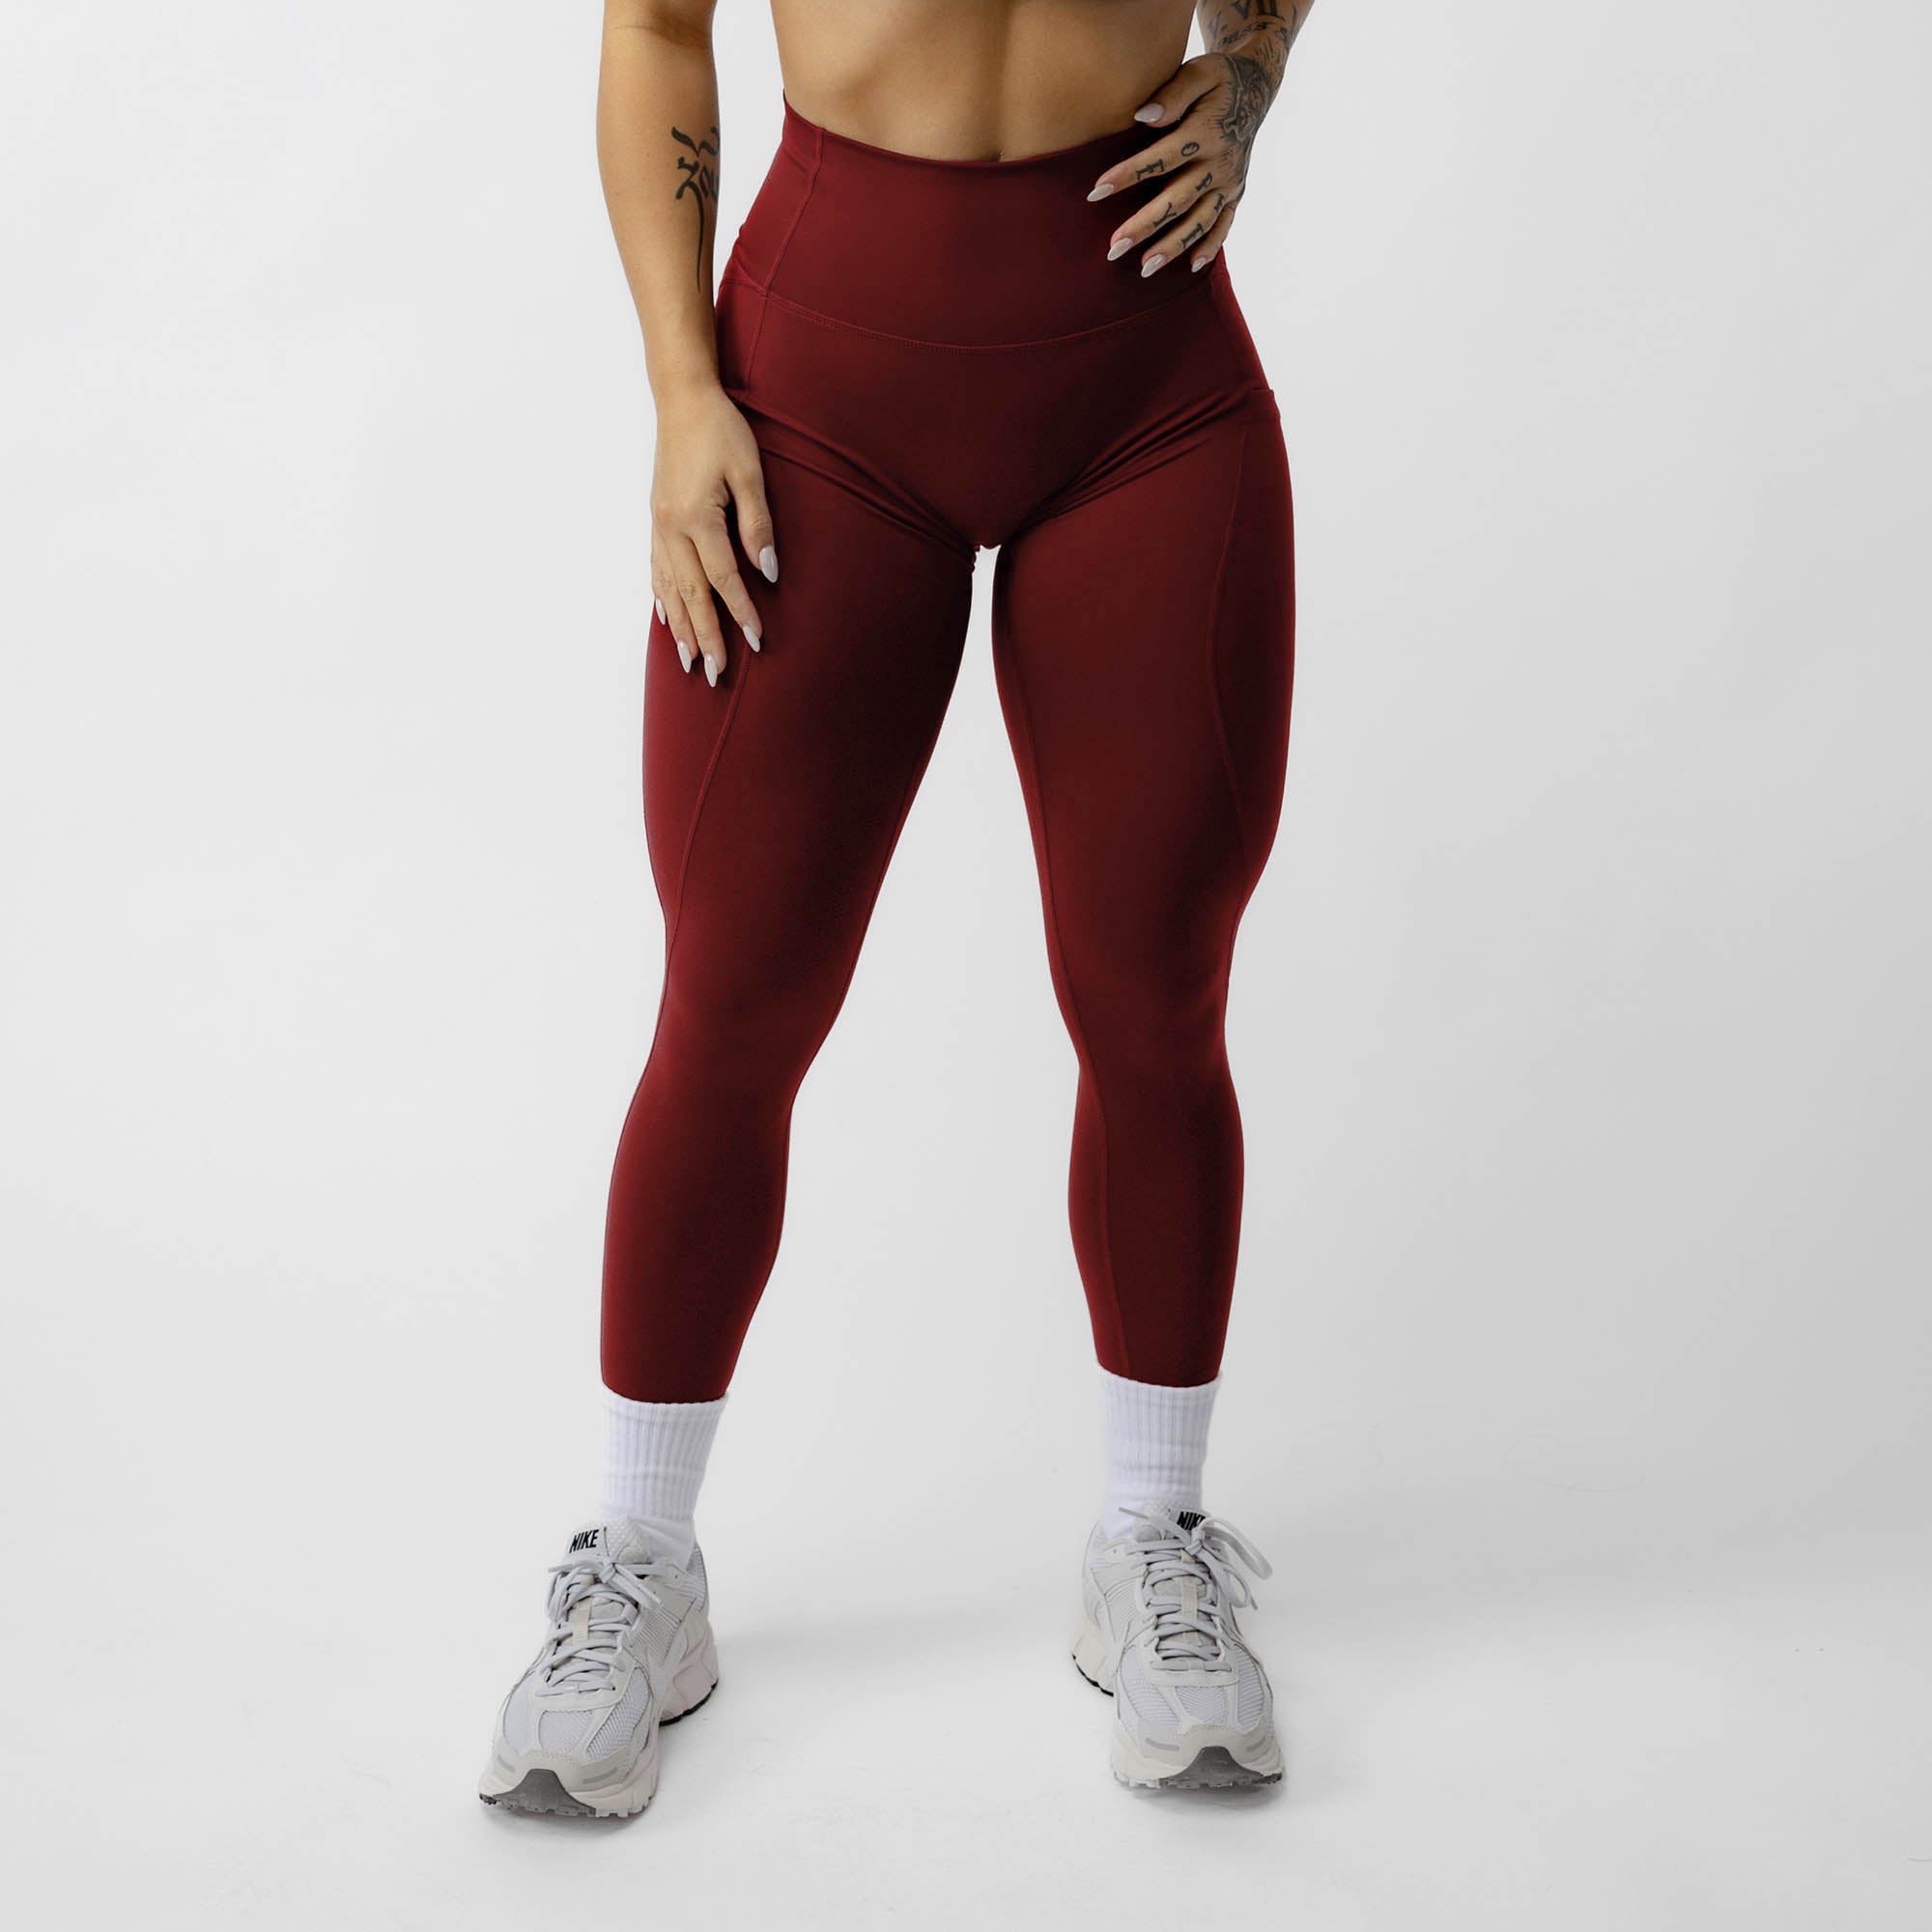 ember red victory legging main